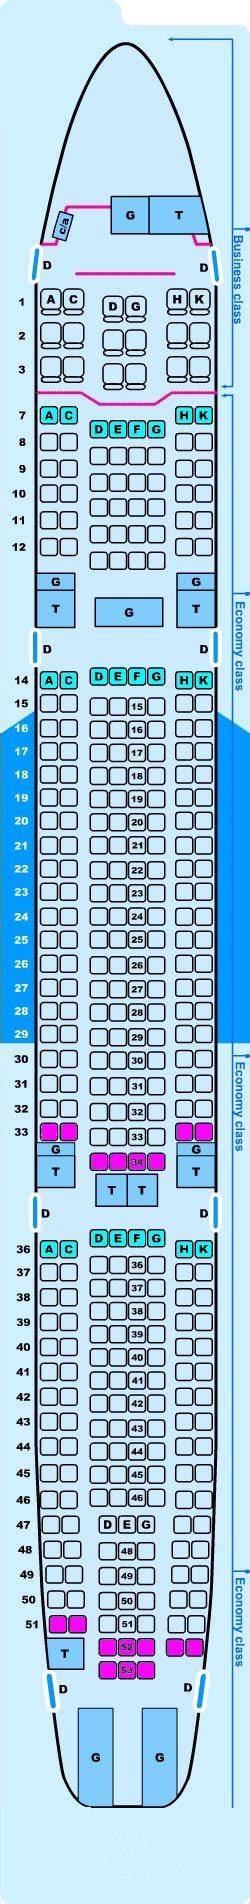 Seat Map Airbus A Lufthansa Best Seats In Plane Porn Sex Picture